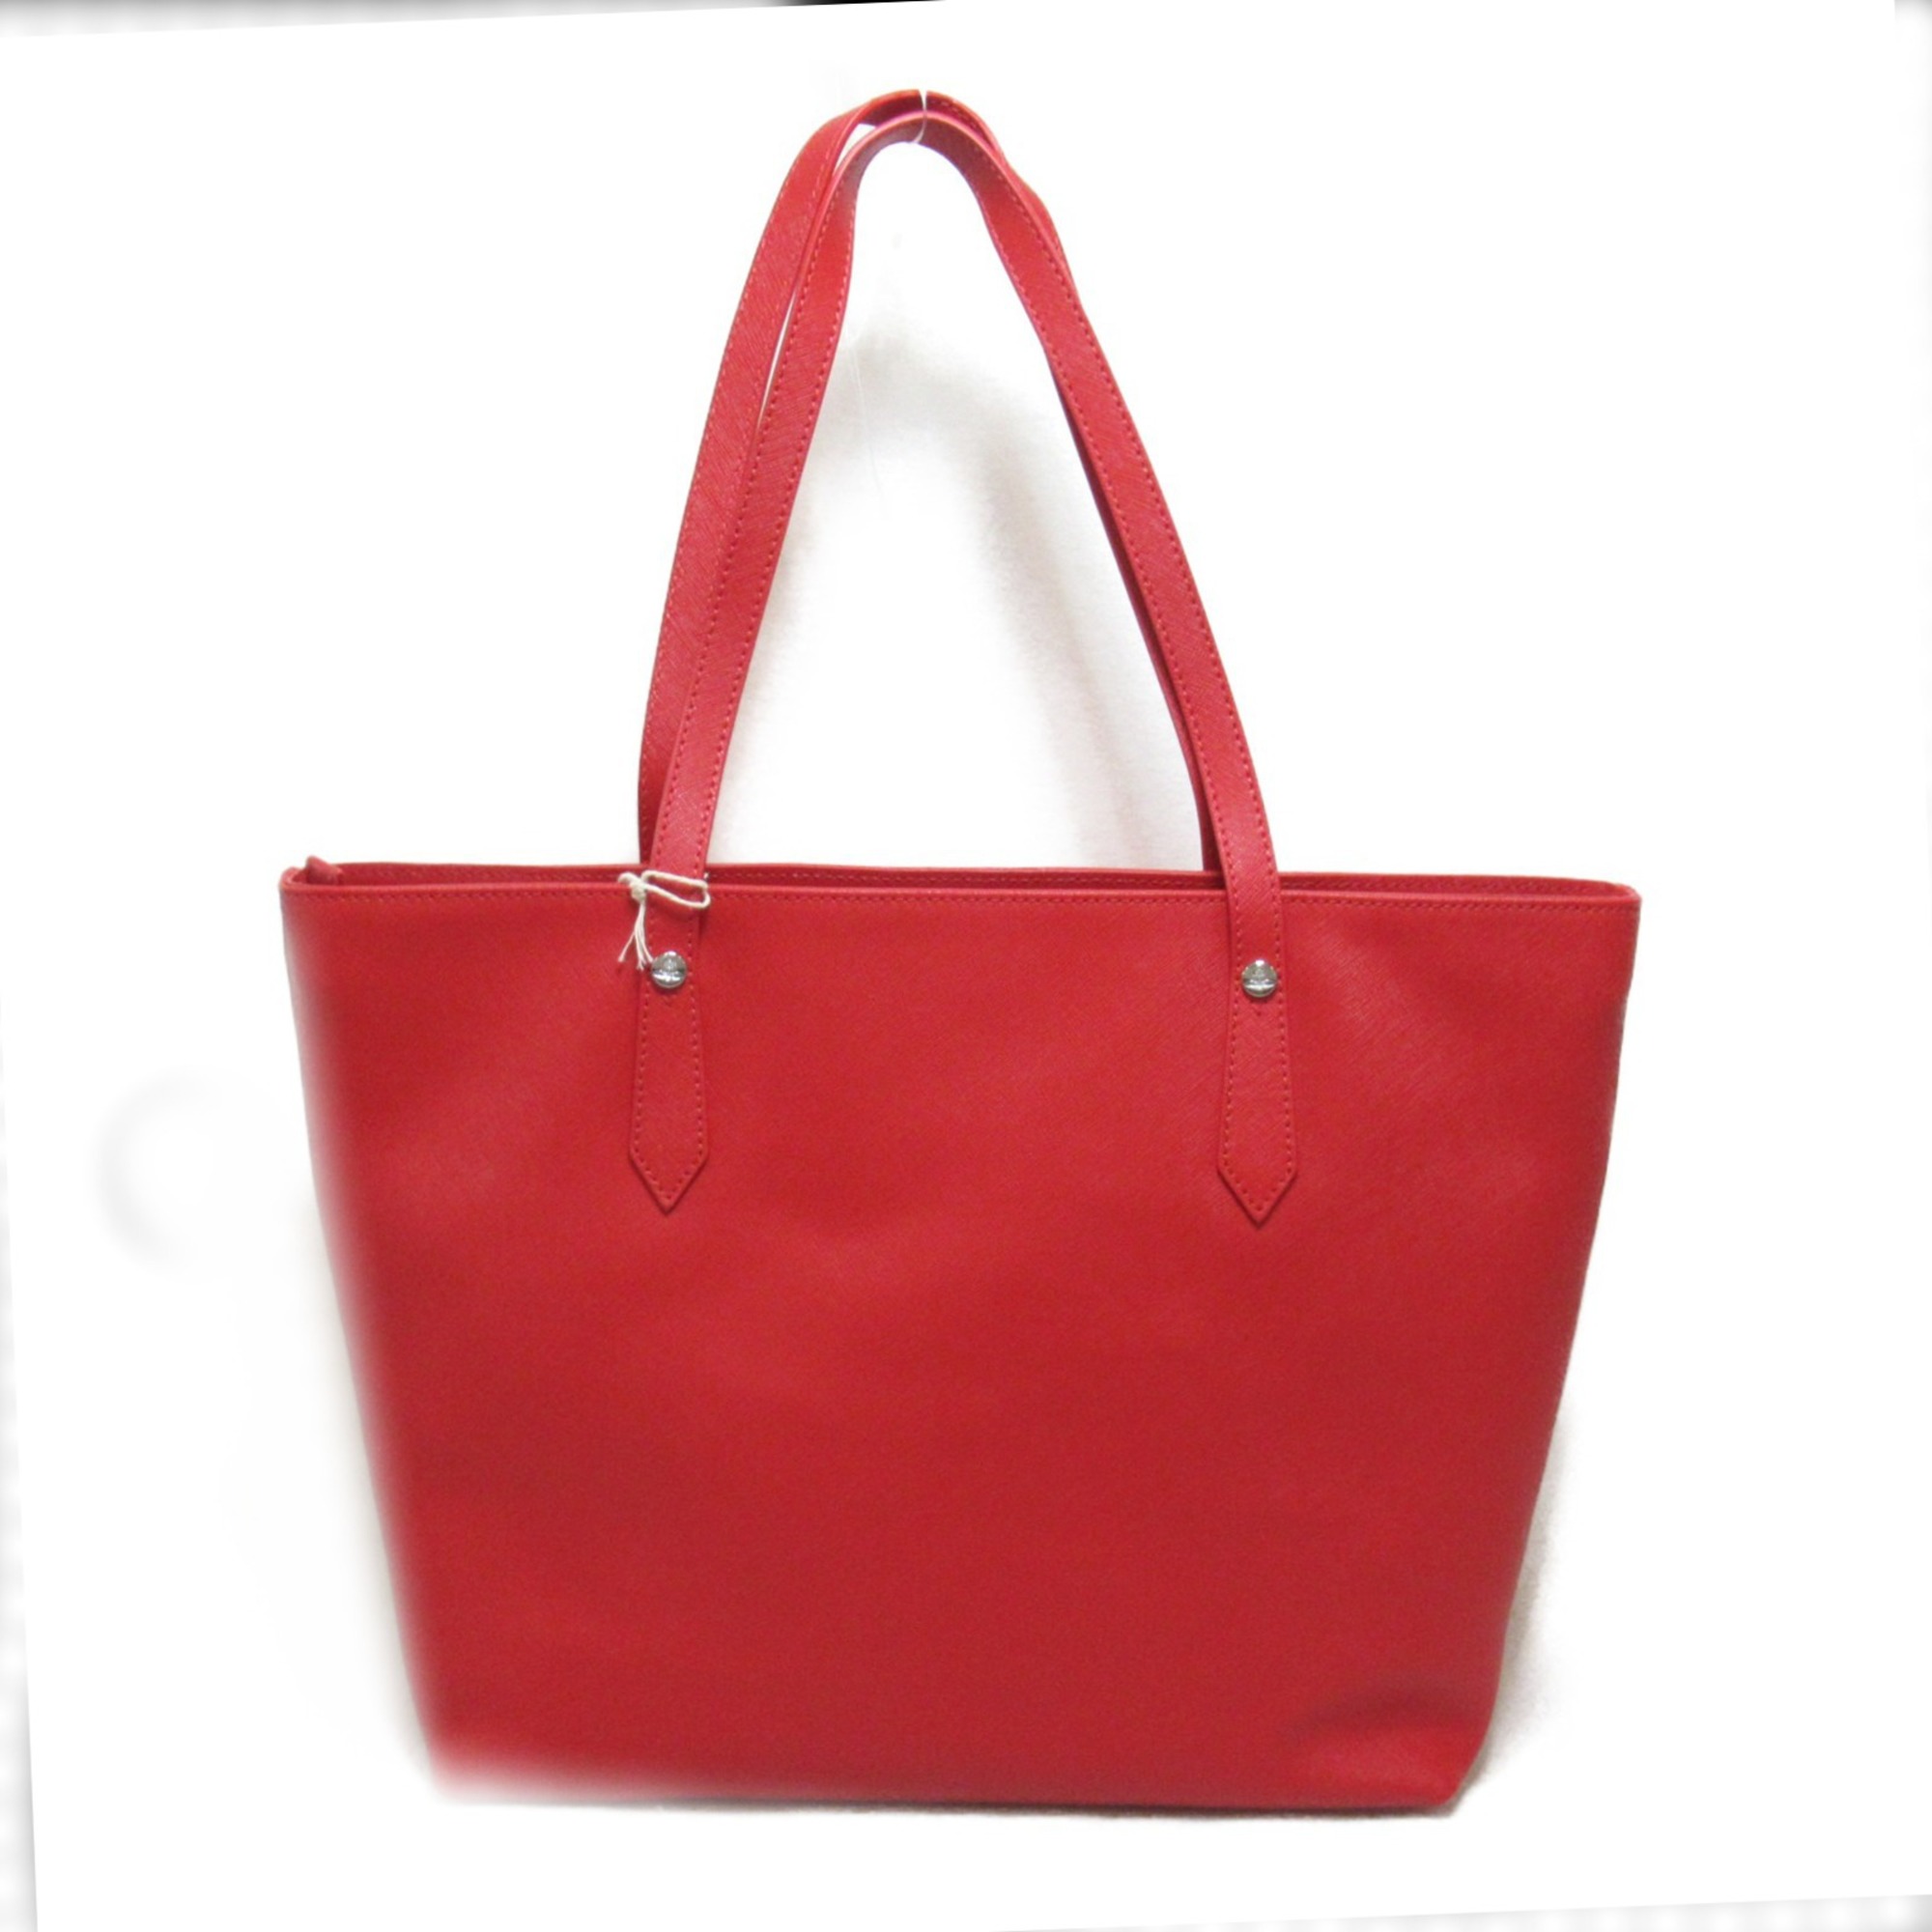 Vivienne Westwood Shopper Tote Bag Red leather 4205004541214H401